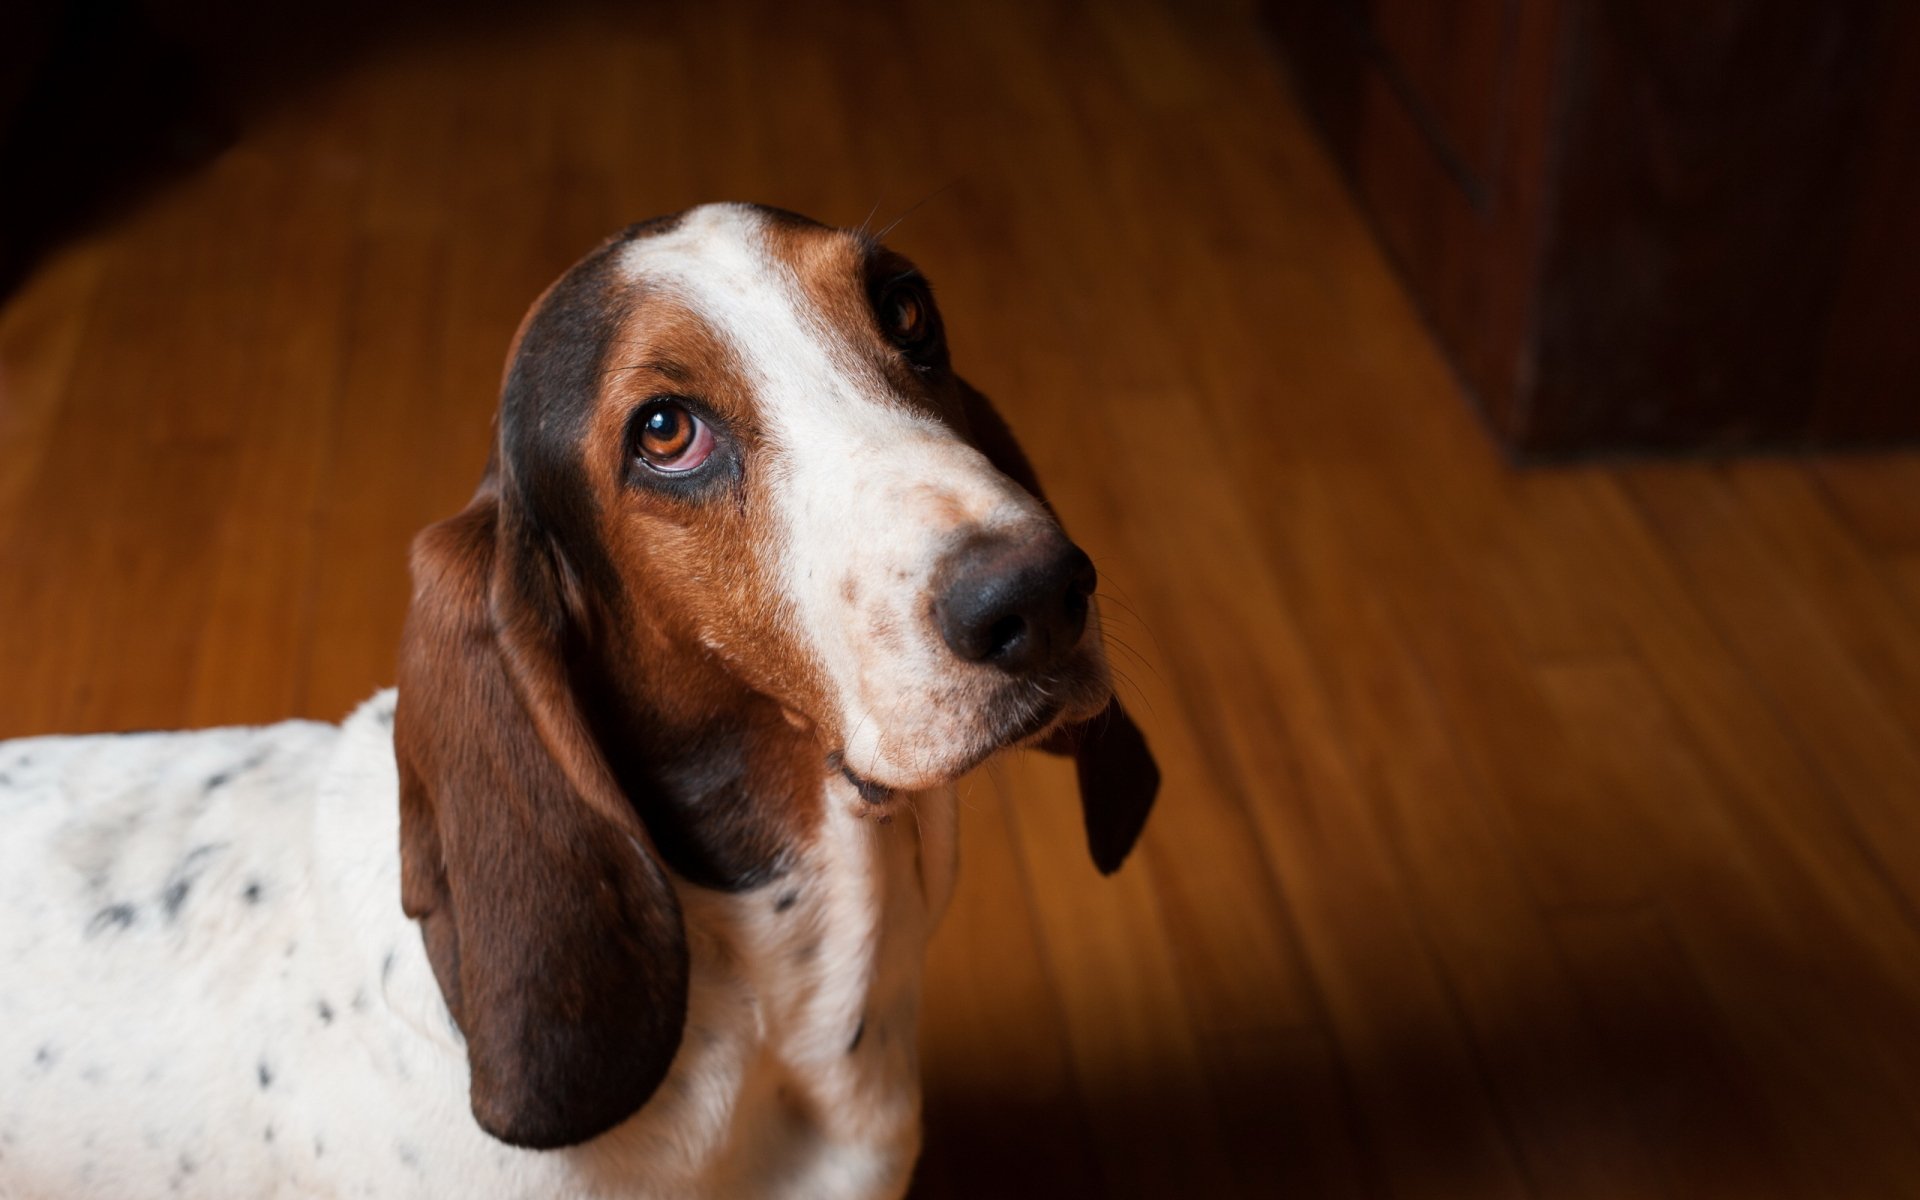 Basset Hound Full HD Wallpaper and Background Image | 2560x1600 | ID:443957